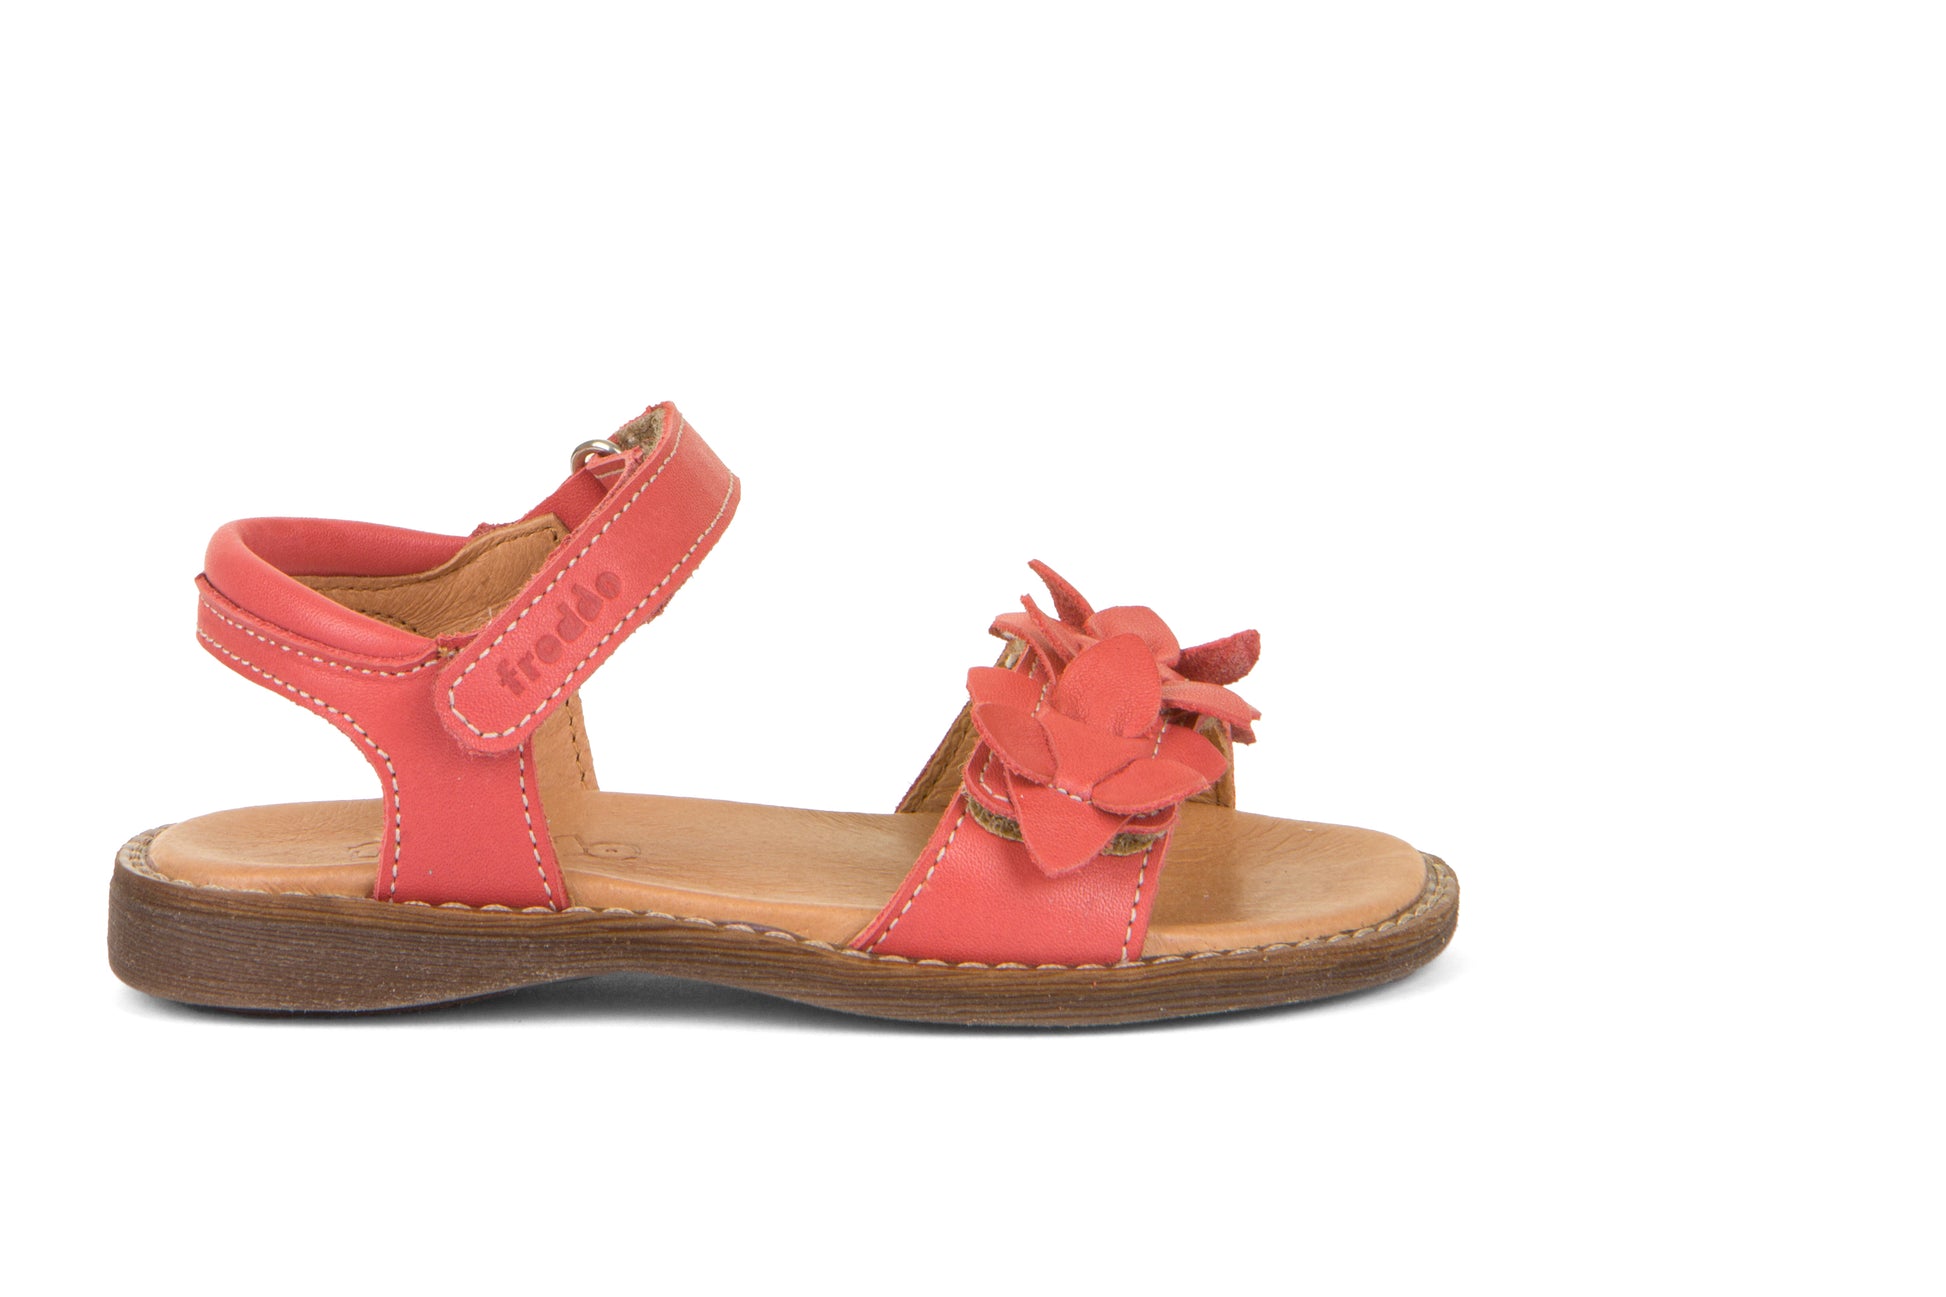 A girls sandal by Froddo, Style G3150228-9 Lore Flowers, in coral with flowers, velcro fastening. Right side view.